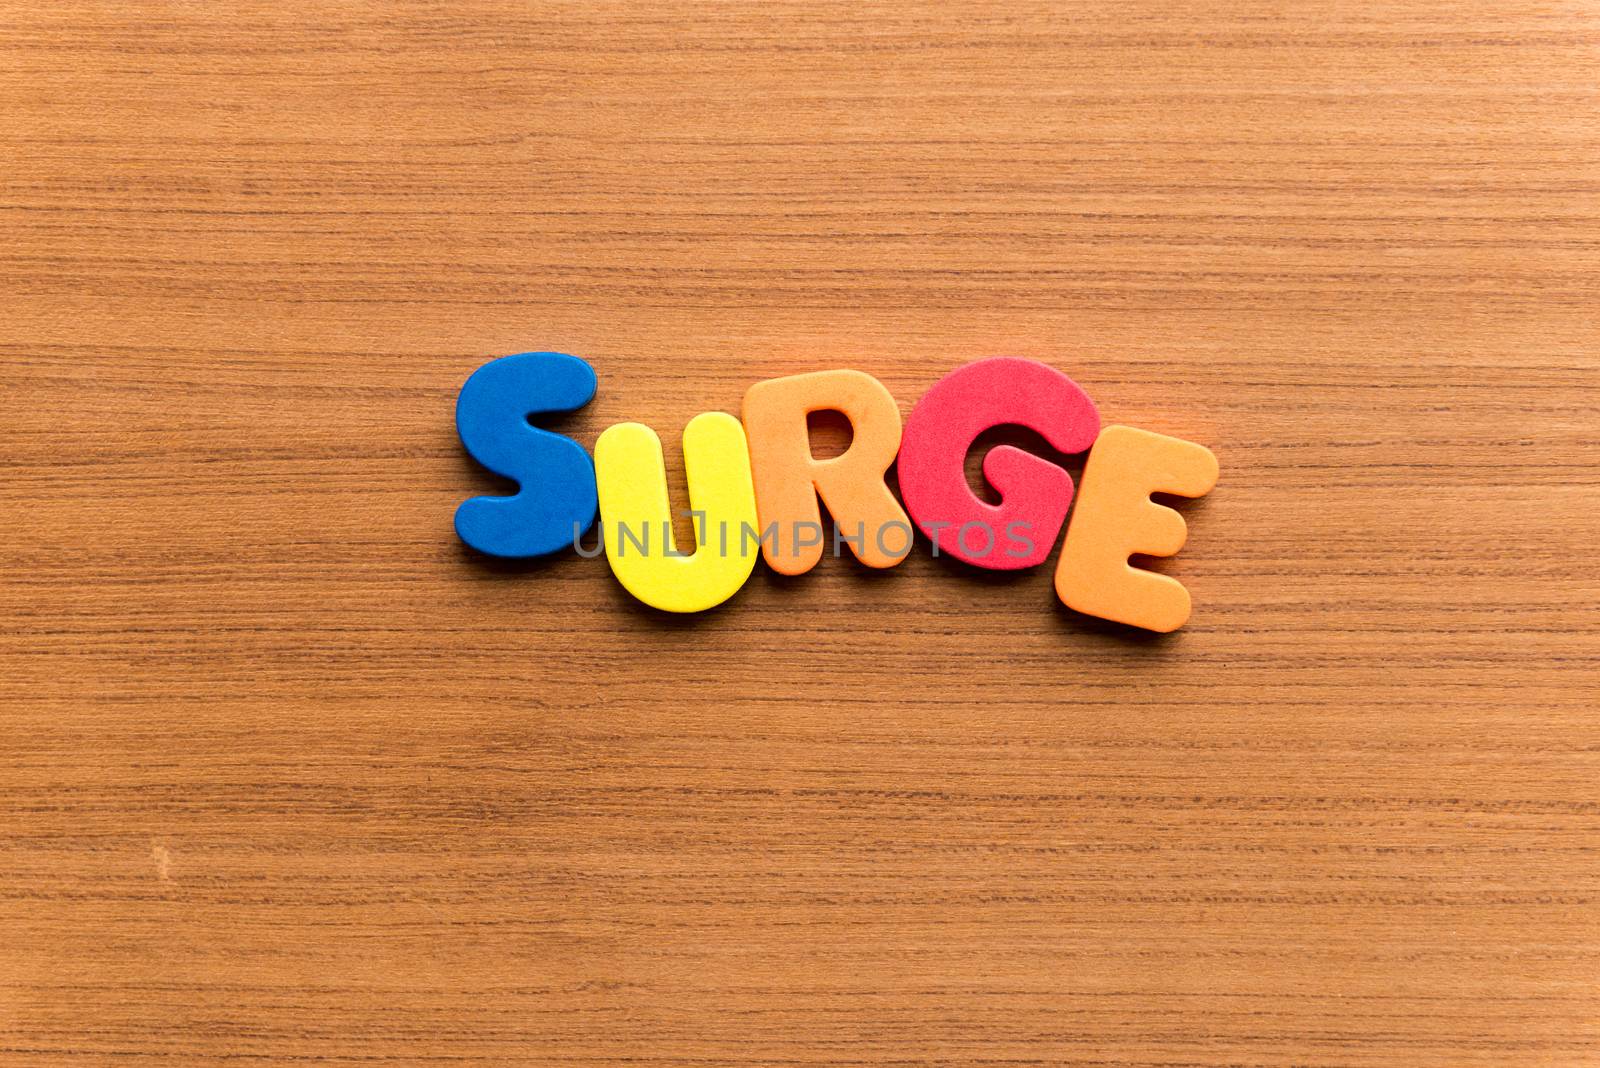 surge colorful word on the wooden background